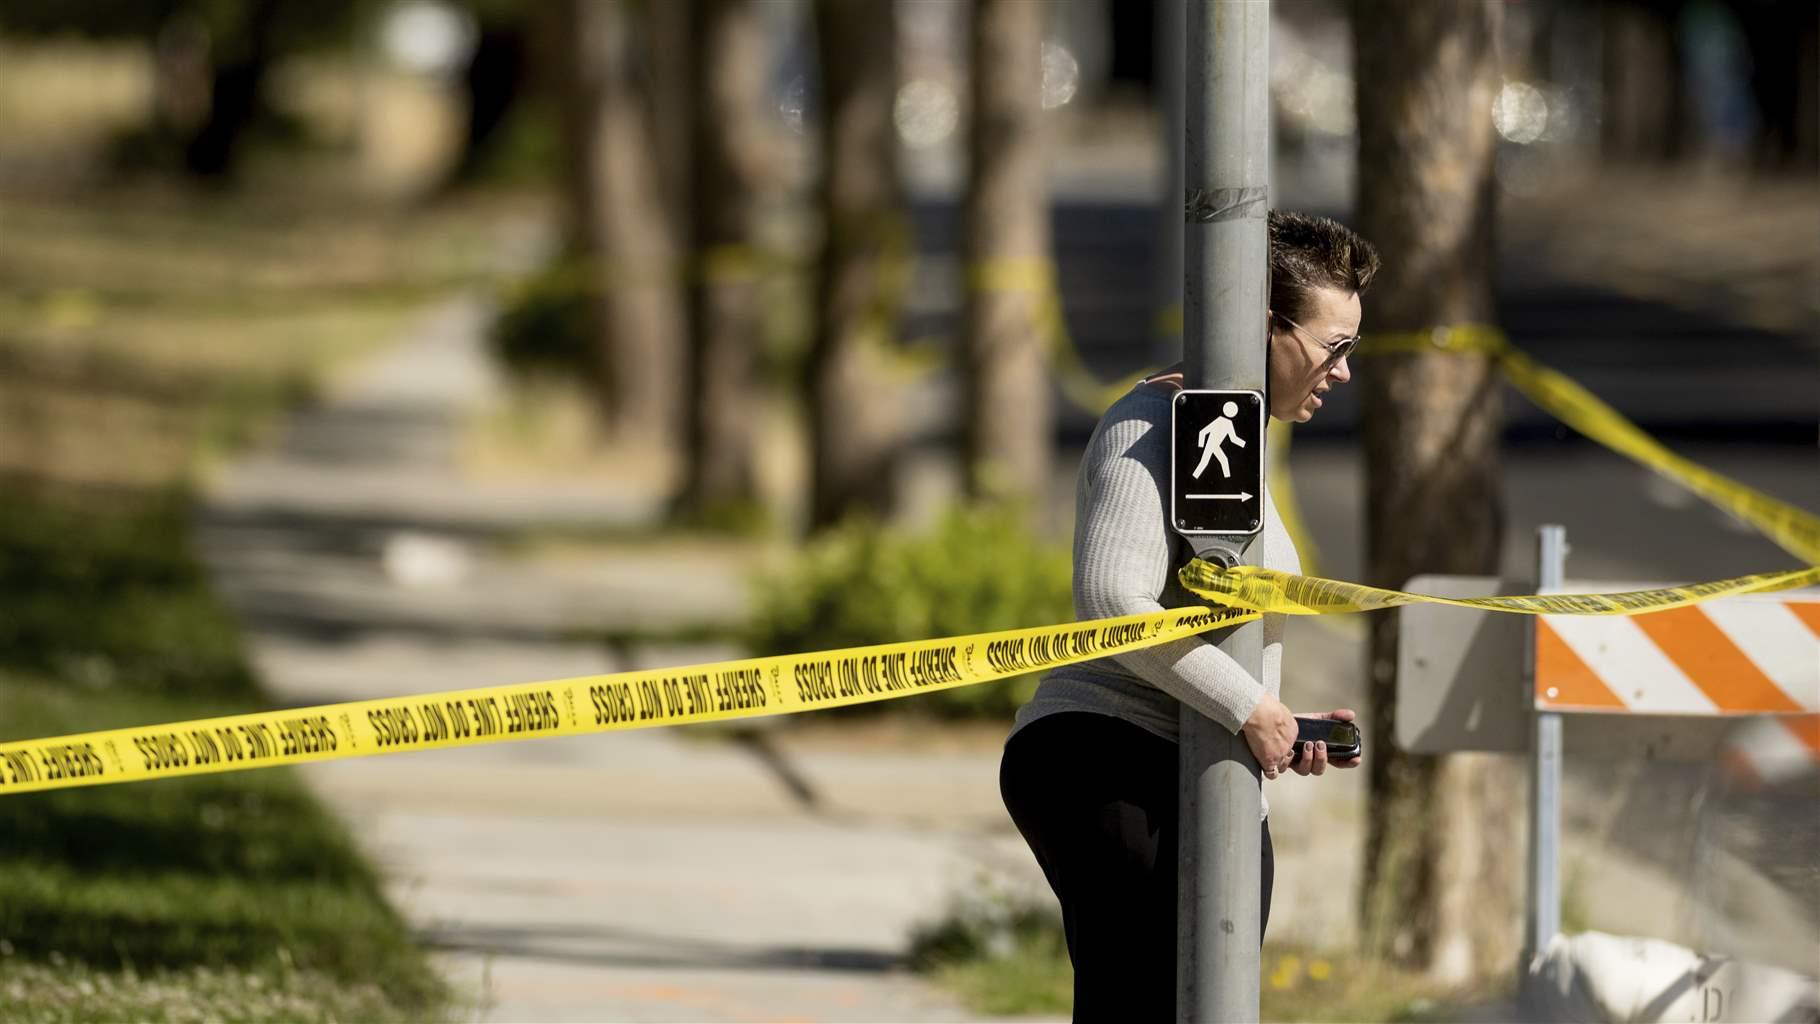 A woman leaves the scene of a shooting at a Santa Clara Valley Transportation Authority (VTA) facility on Wednesday, May 26, 2021, in San Jose, Calif. Santa Clara County sheriff's spokesman said the rail yard shooting left multiple people, including the shooter, dead.